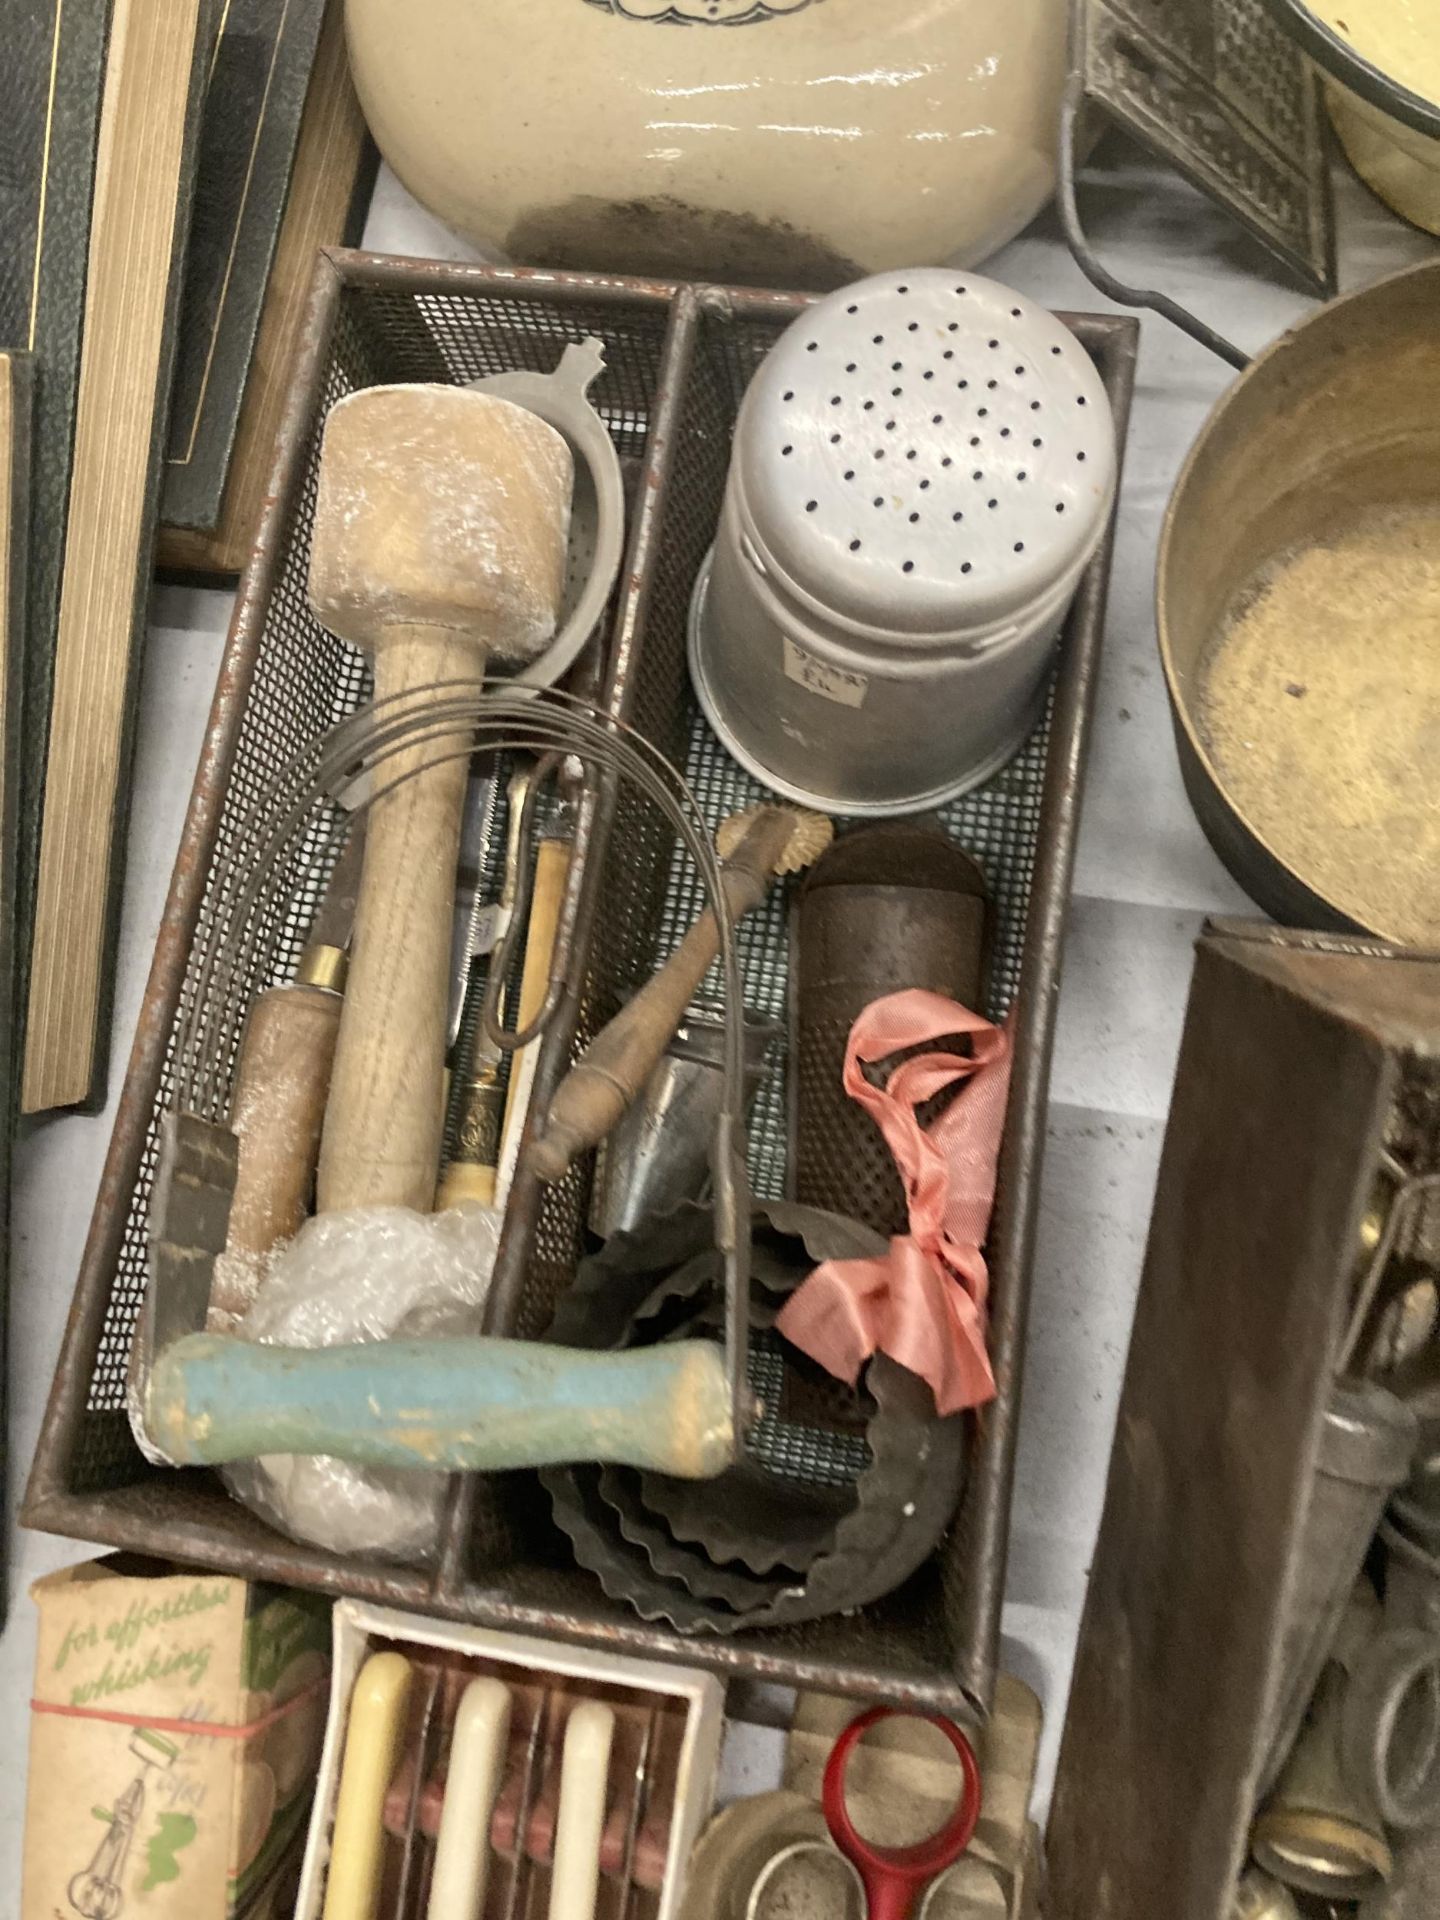 A QUANTITY OF VINTAGE KITCHENALIA ITEMS TO INCLUDE FLATWARE, ICING SETS, METAL PASTRY CASES, BRASS - Image 2 of 3